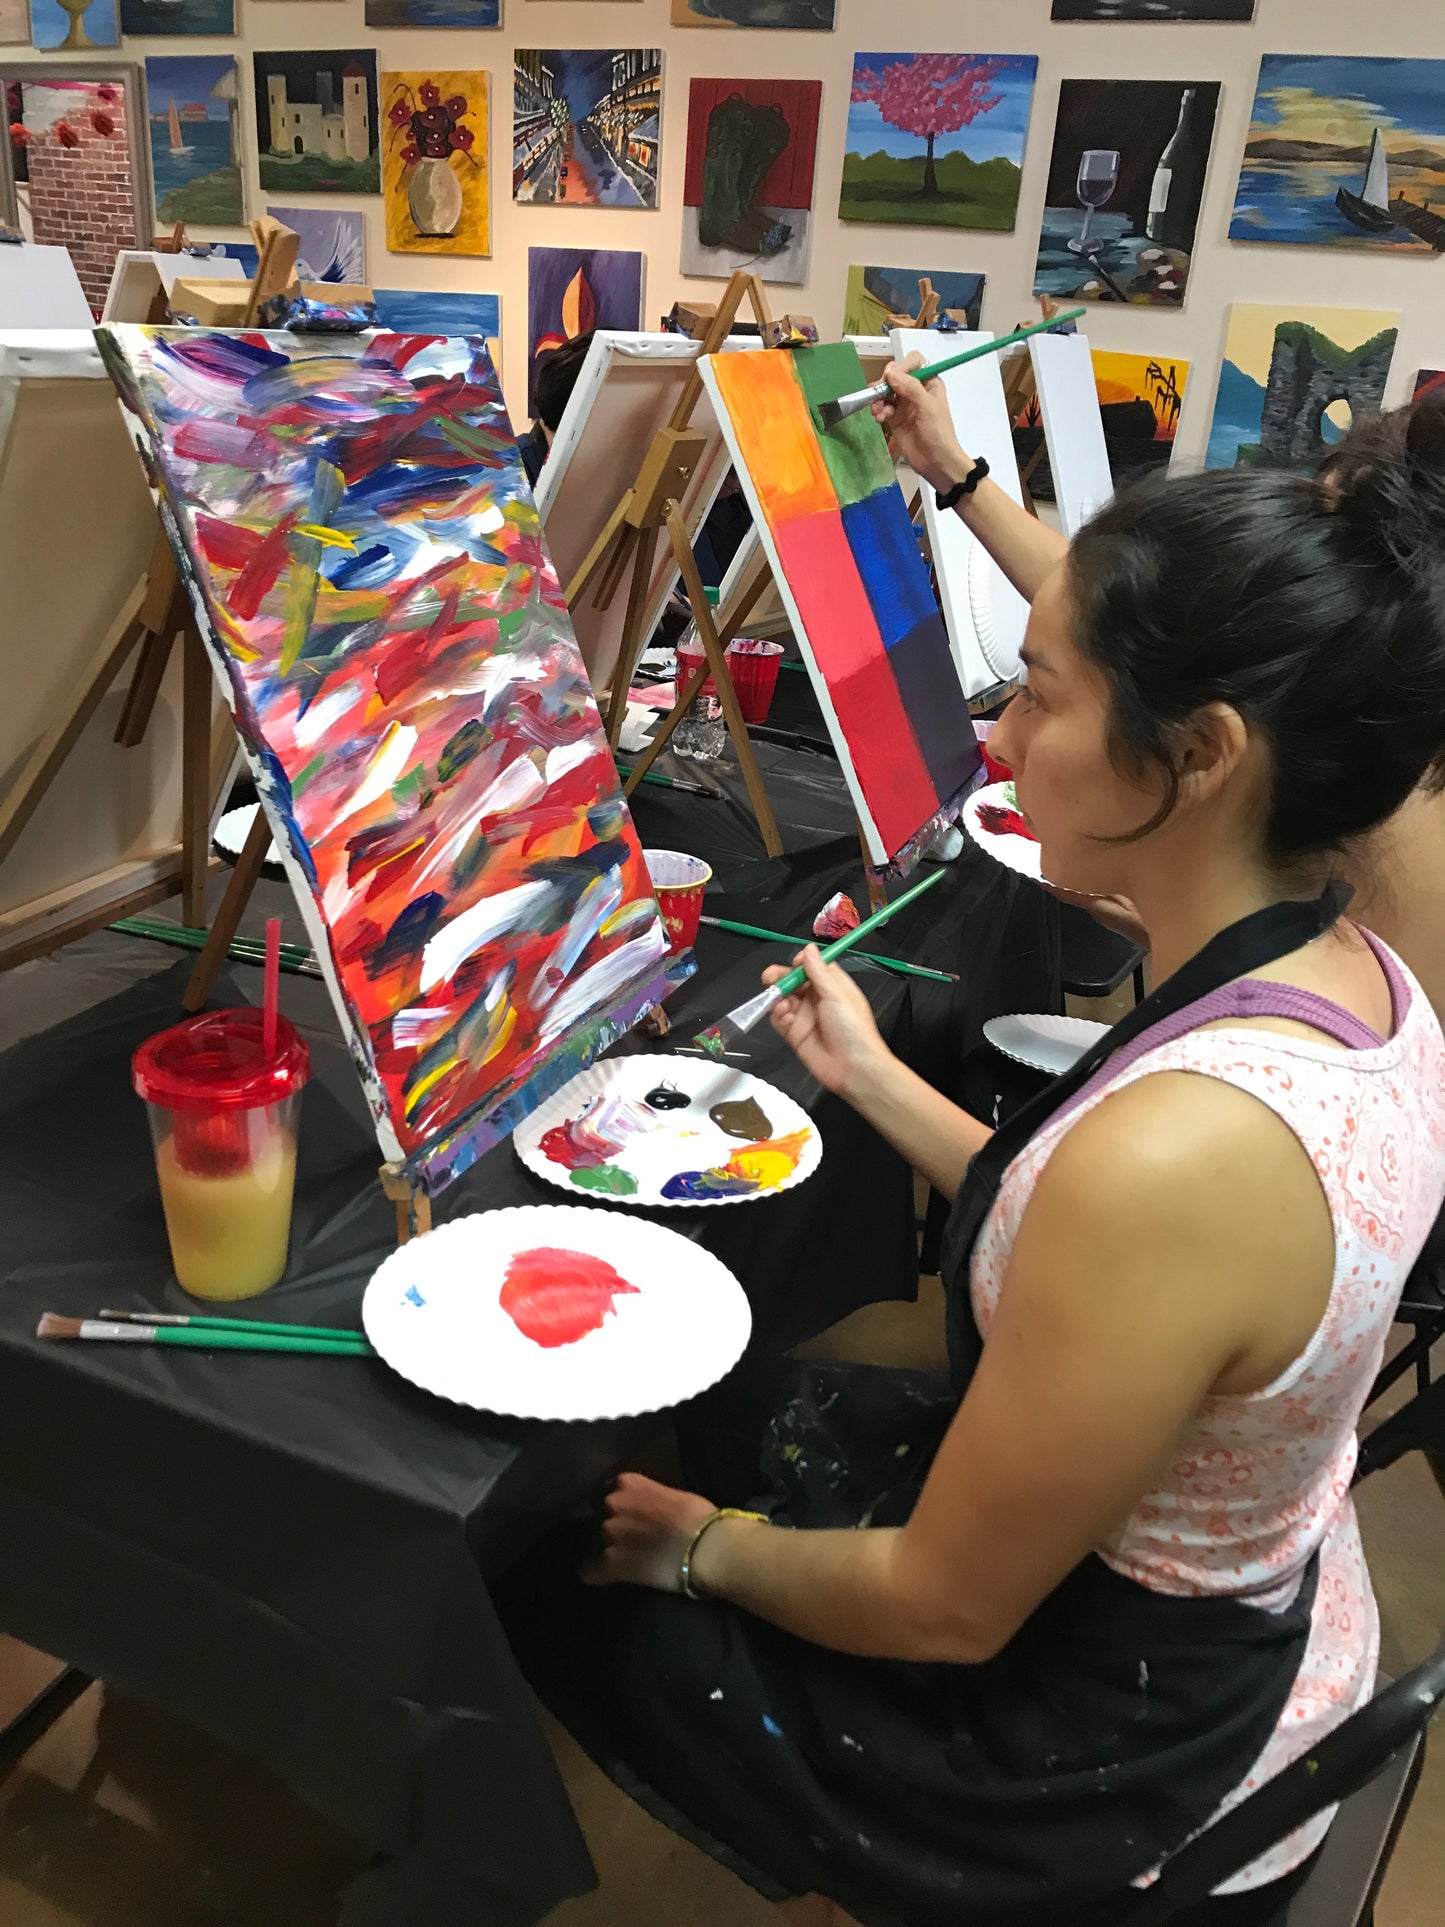 Wed, Oct 31, 9-12am Slow Flow Mojo Public Houston Yoga and Paint Class